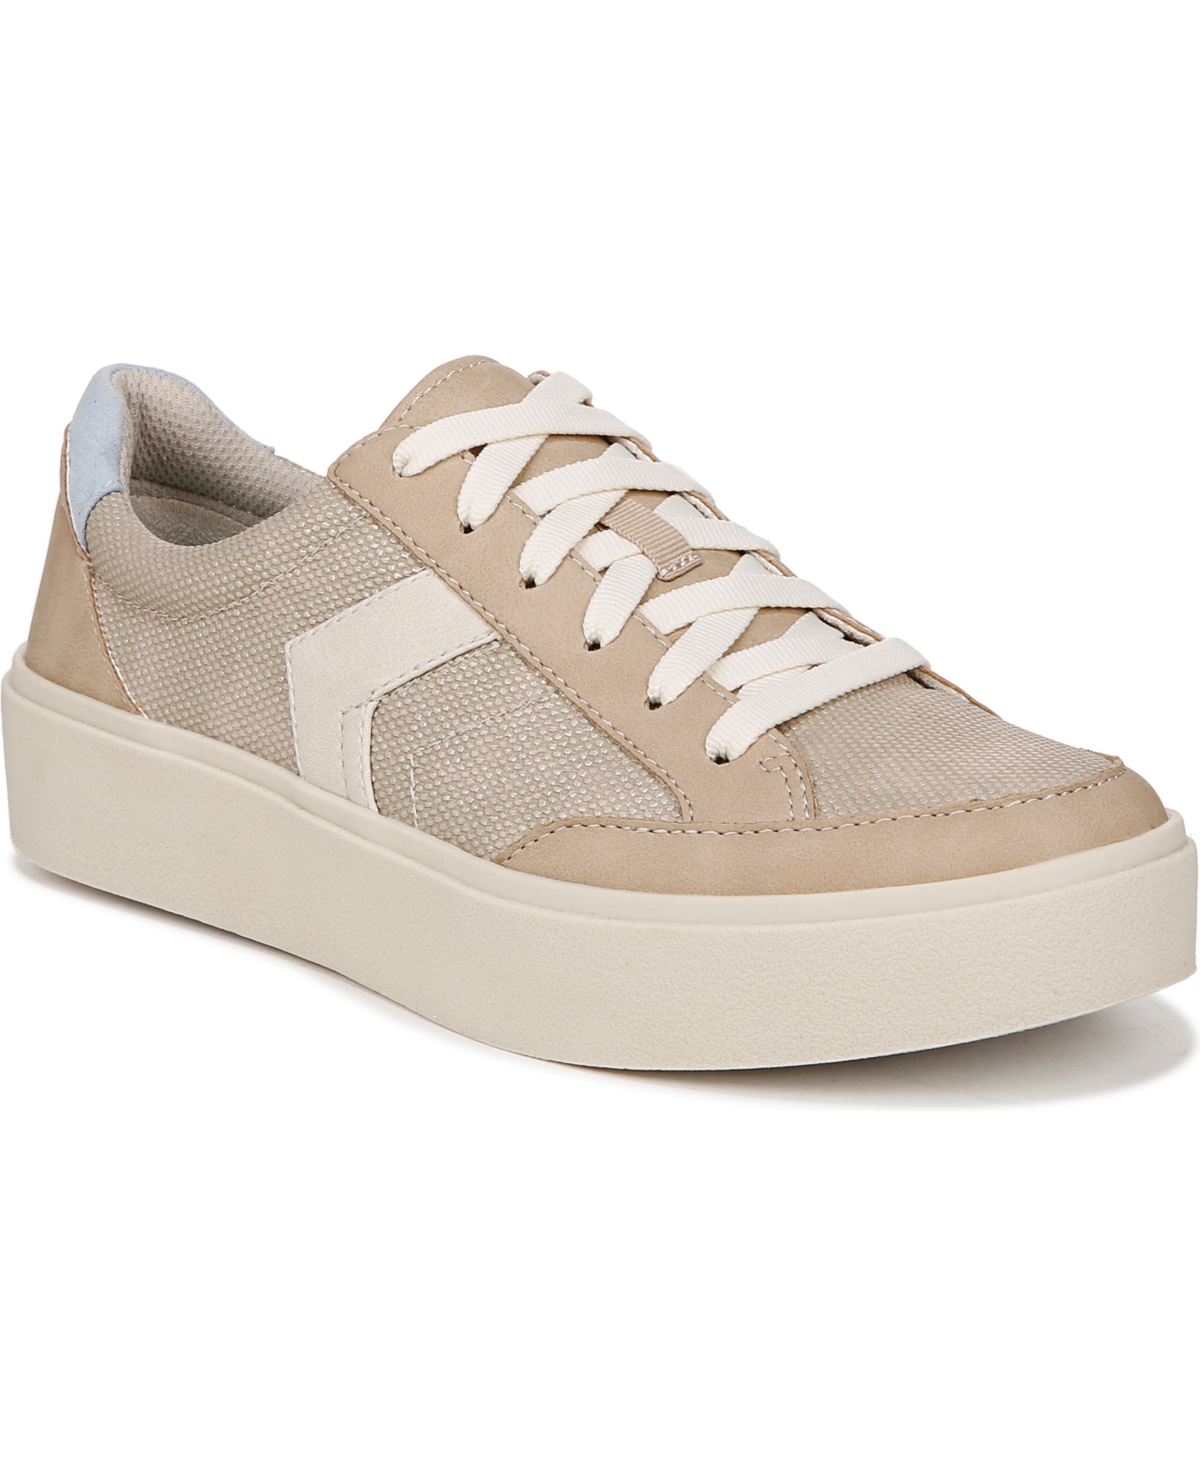 Women's Madison-Lace Sneakers - Taupe Faux Leather